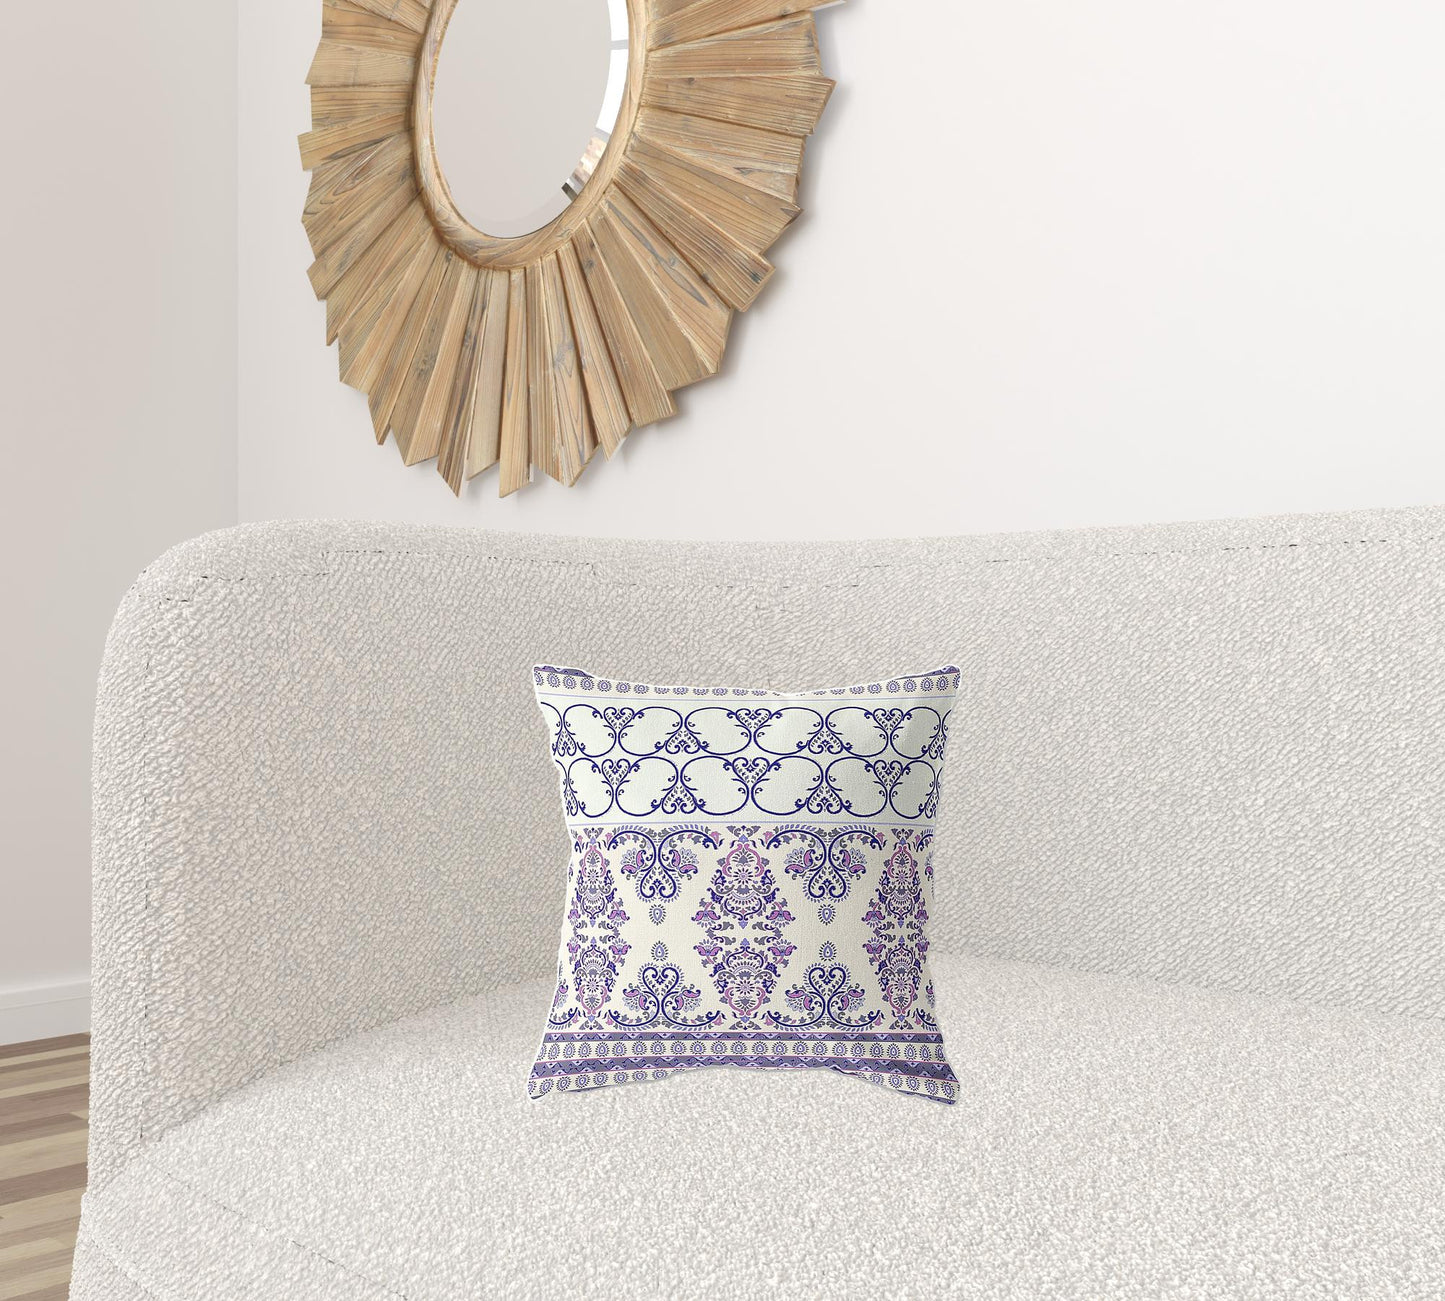 16"x16" Off White And Purple Gray Zip Broadcloth Damask Throw Pillow